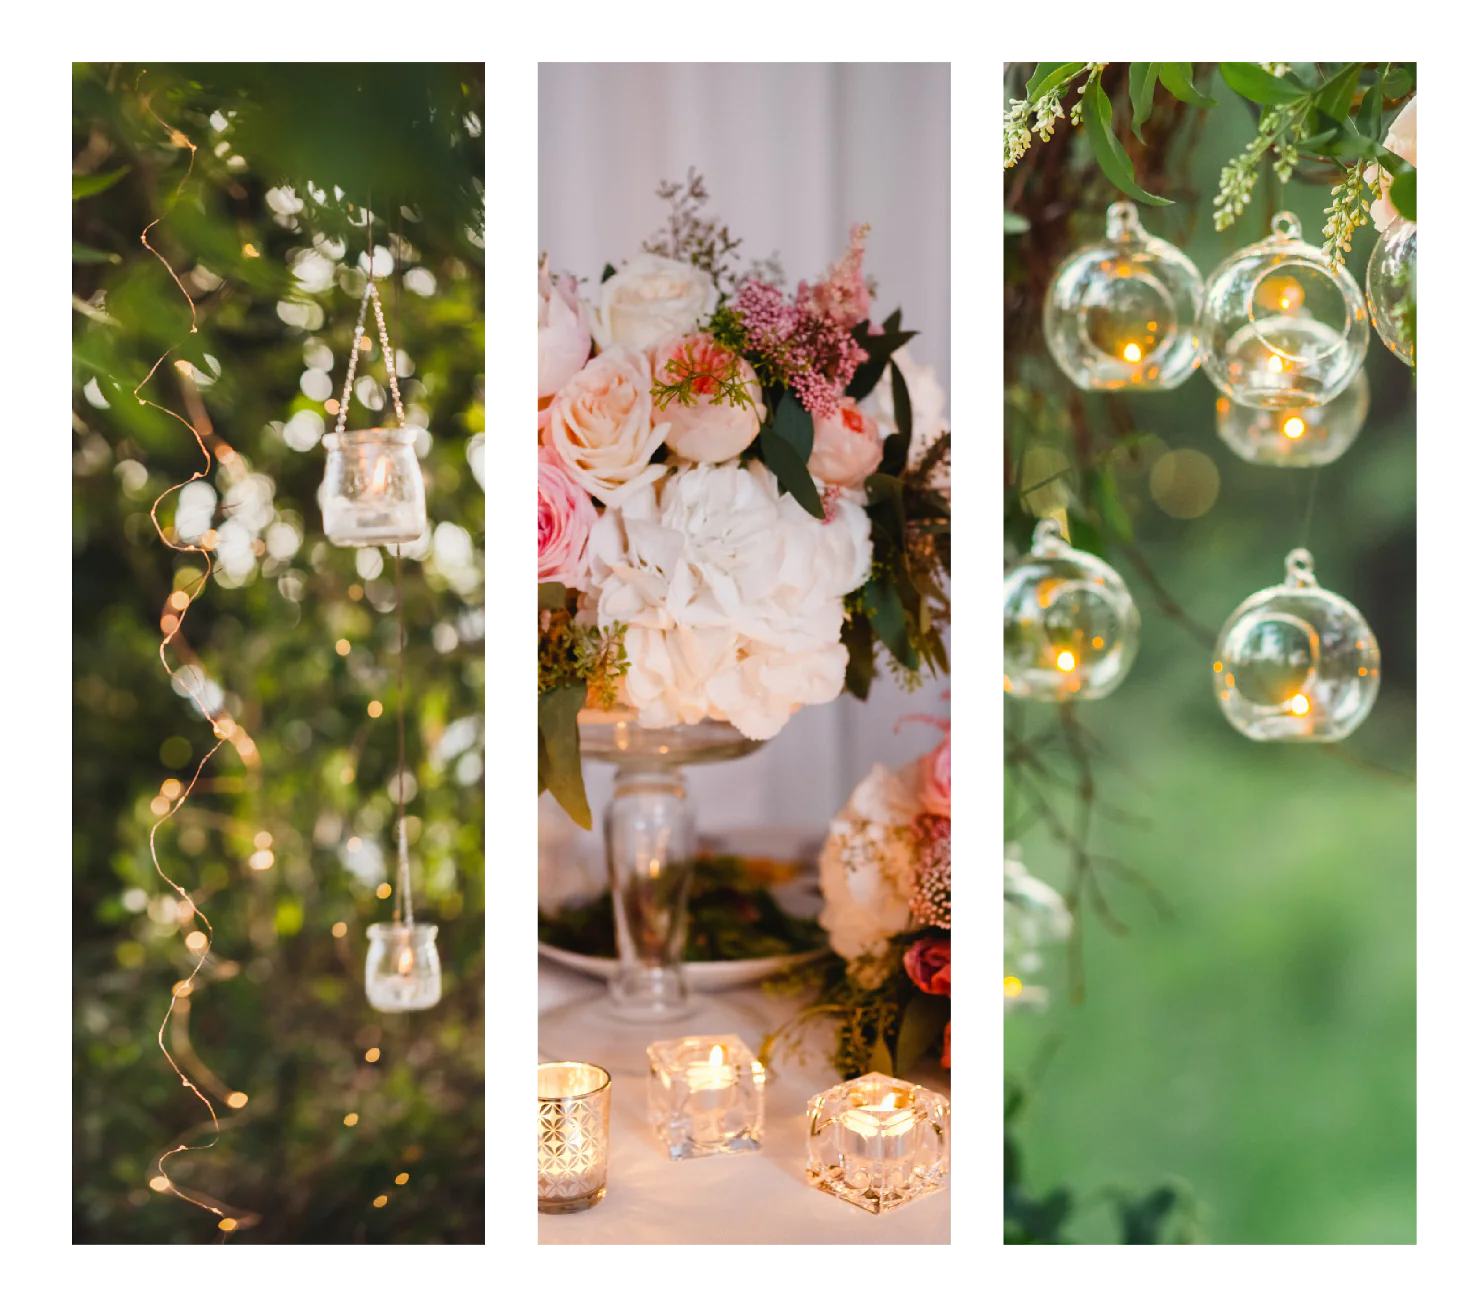 place votives in jars and lanterns